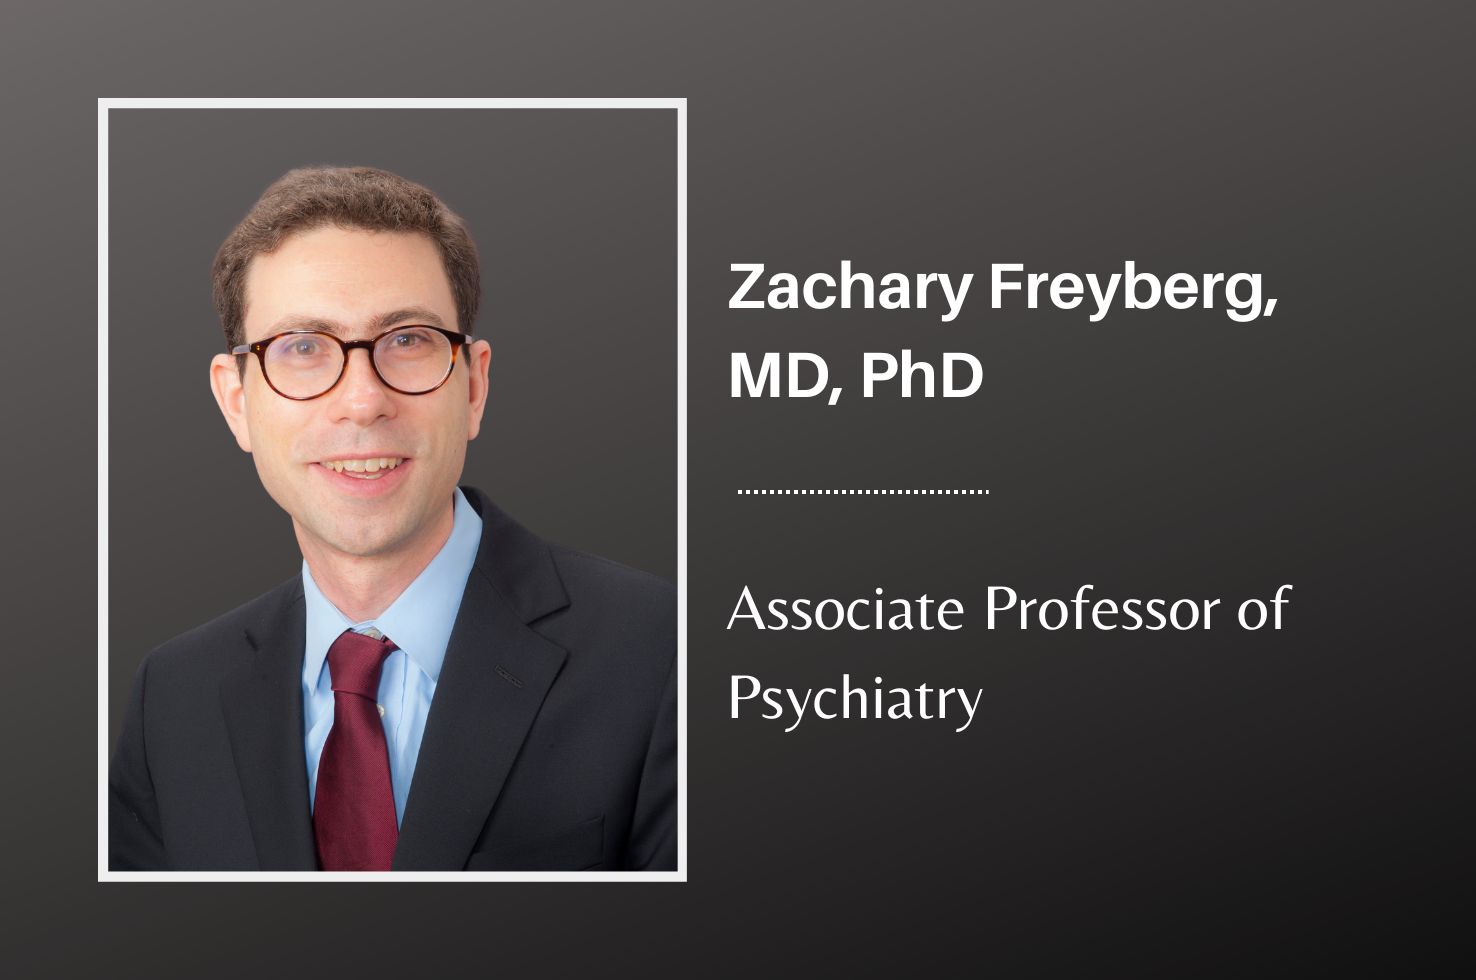 Dr. Zachary Freyberg Promoted